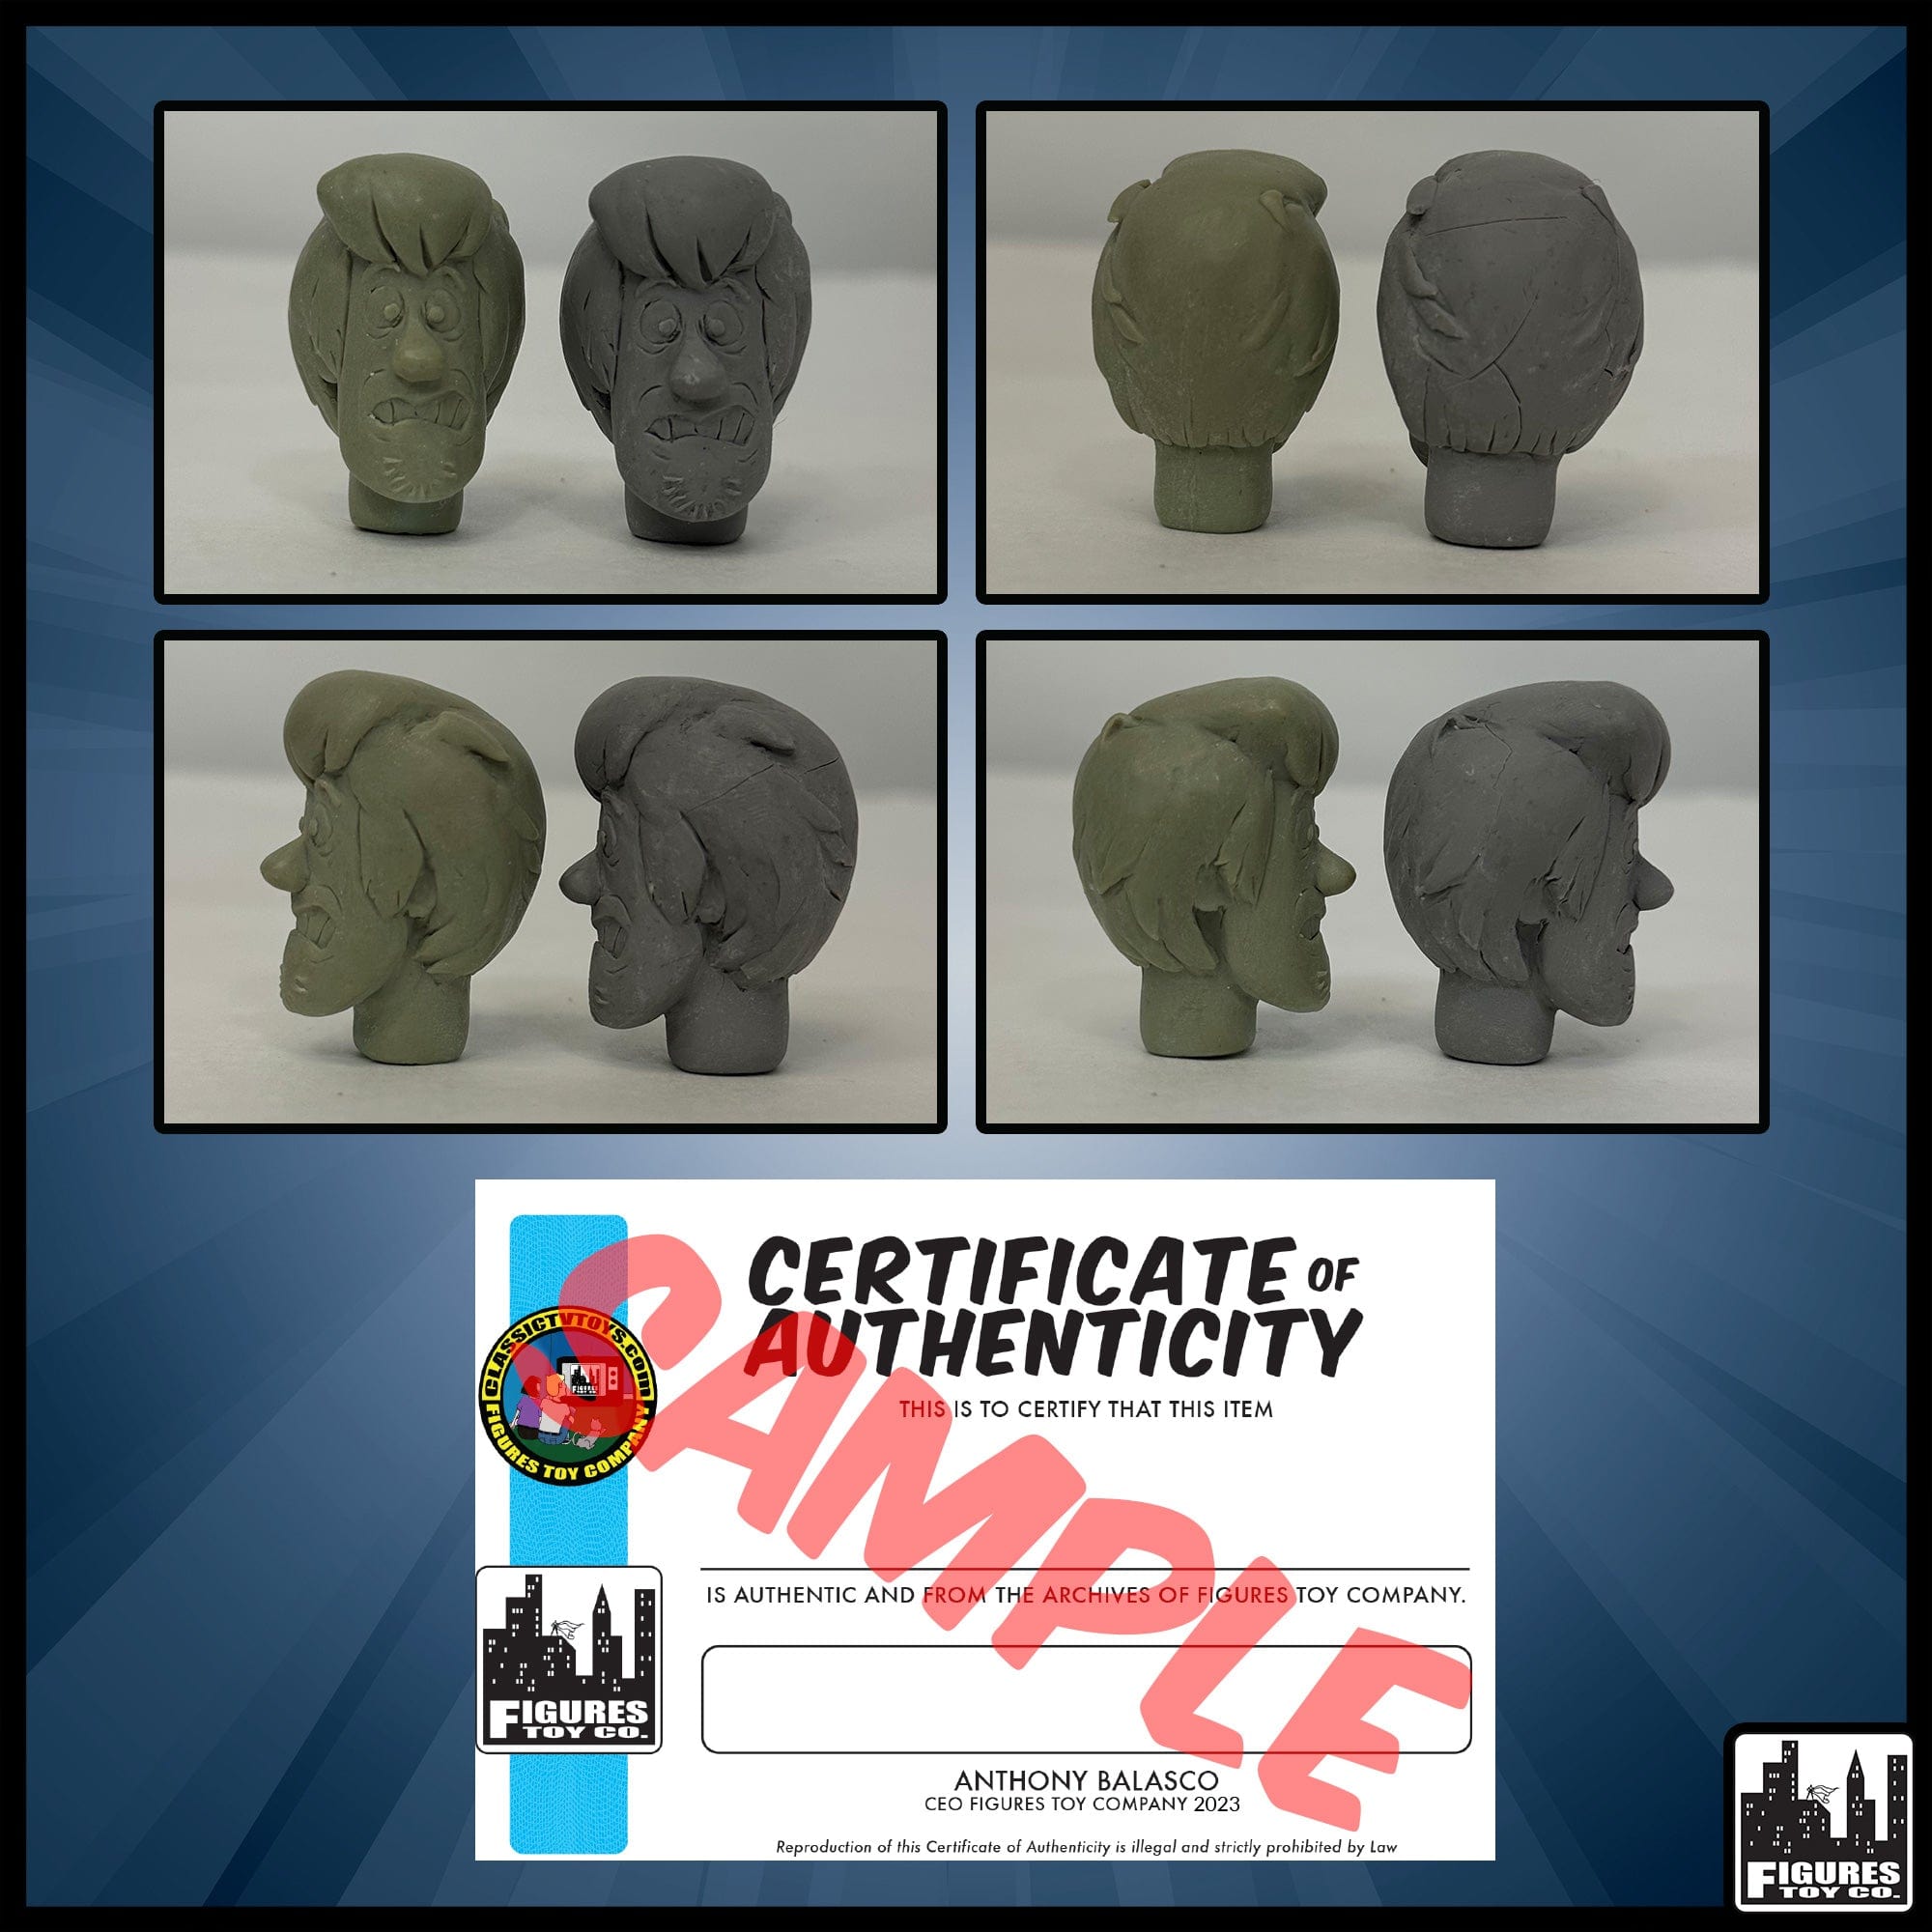 Resin Casted Scooby Doo Series Shaggy Scared Variant Heads